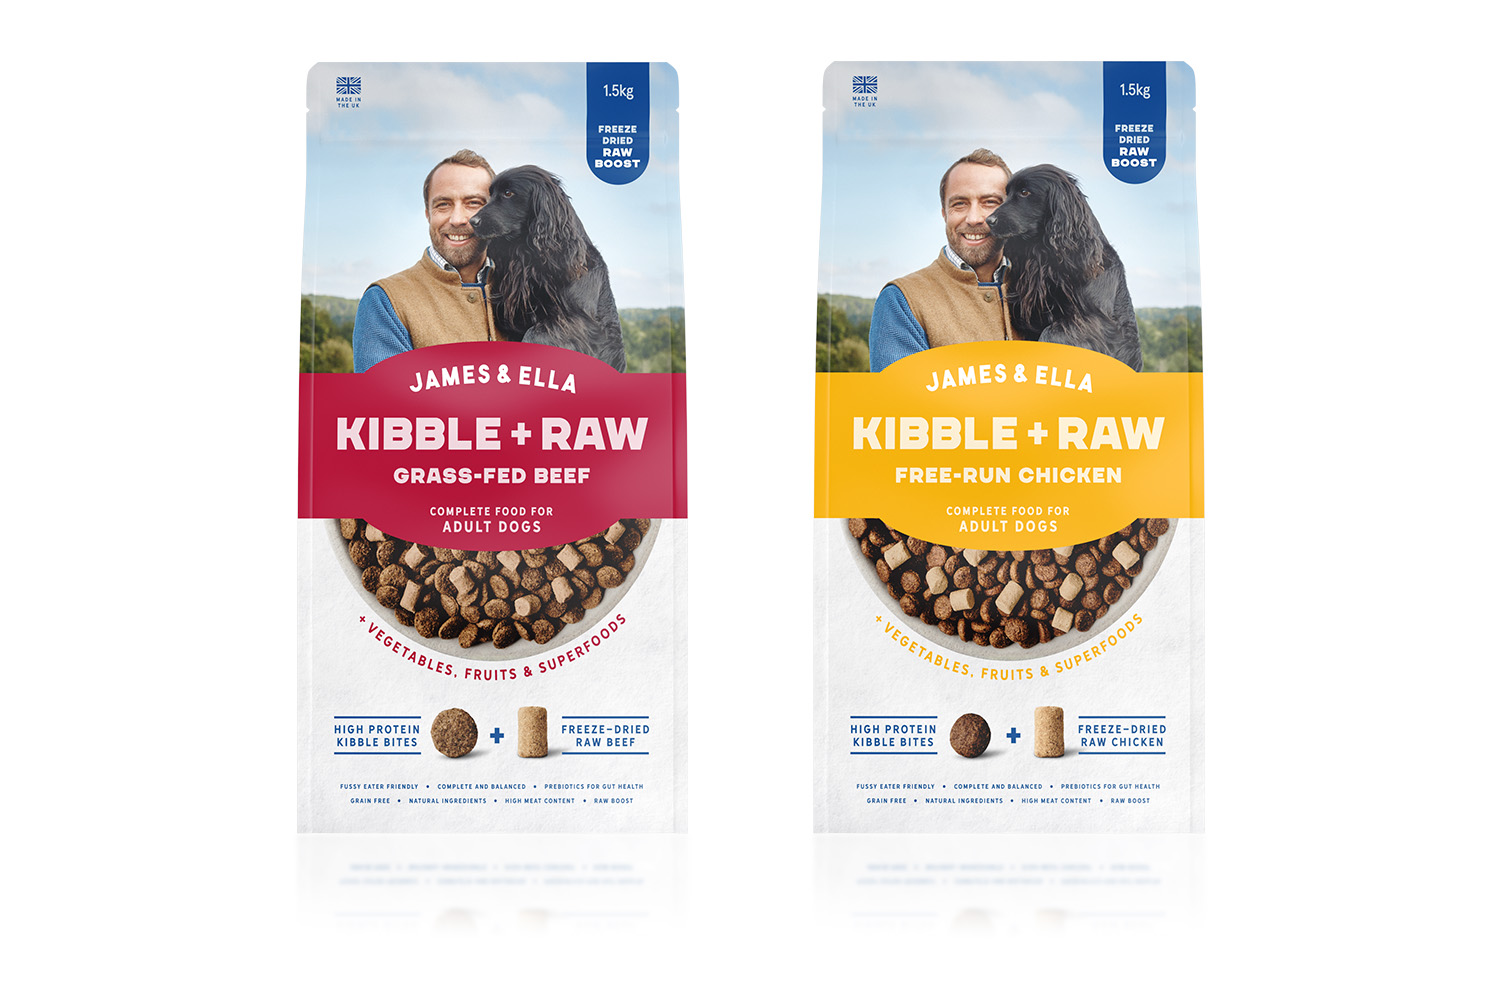 A banner advertisement for James & Ella's Kibble + Raw food with a product image